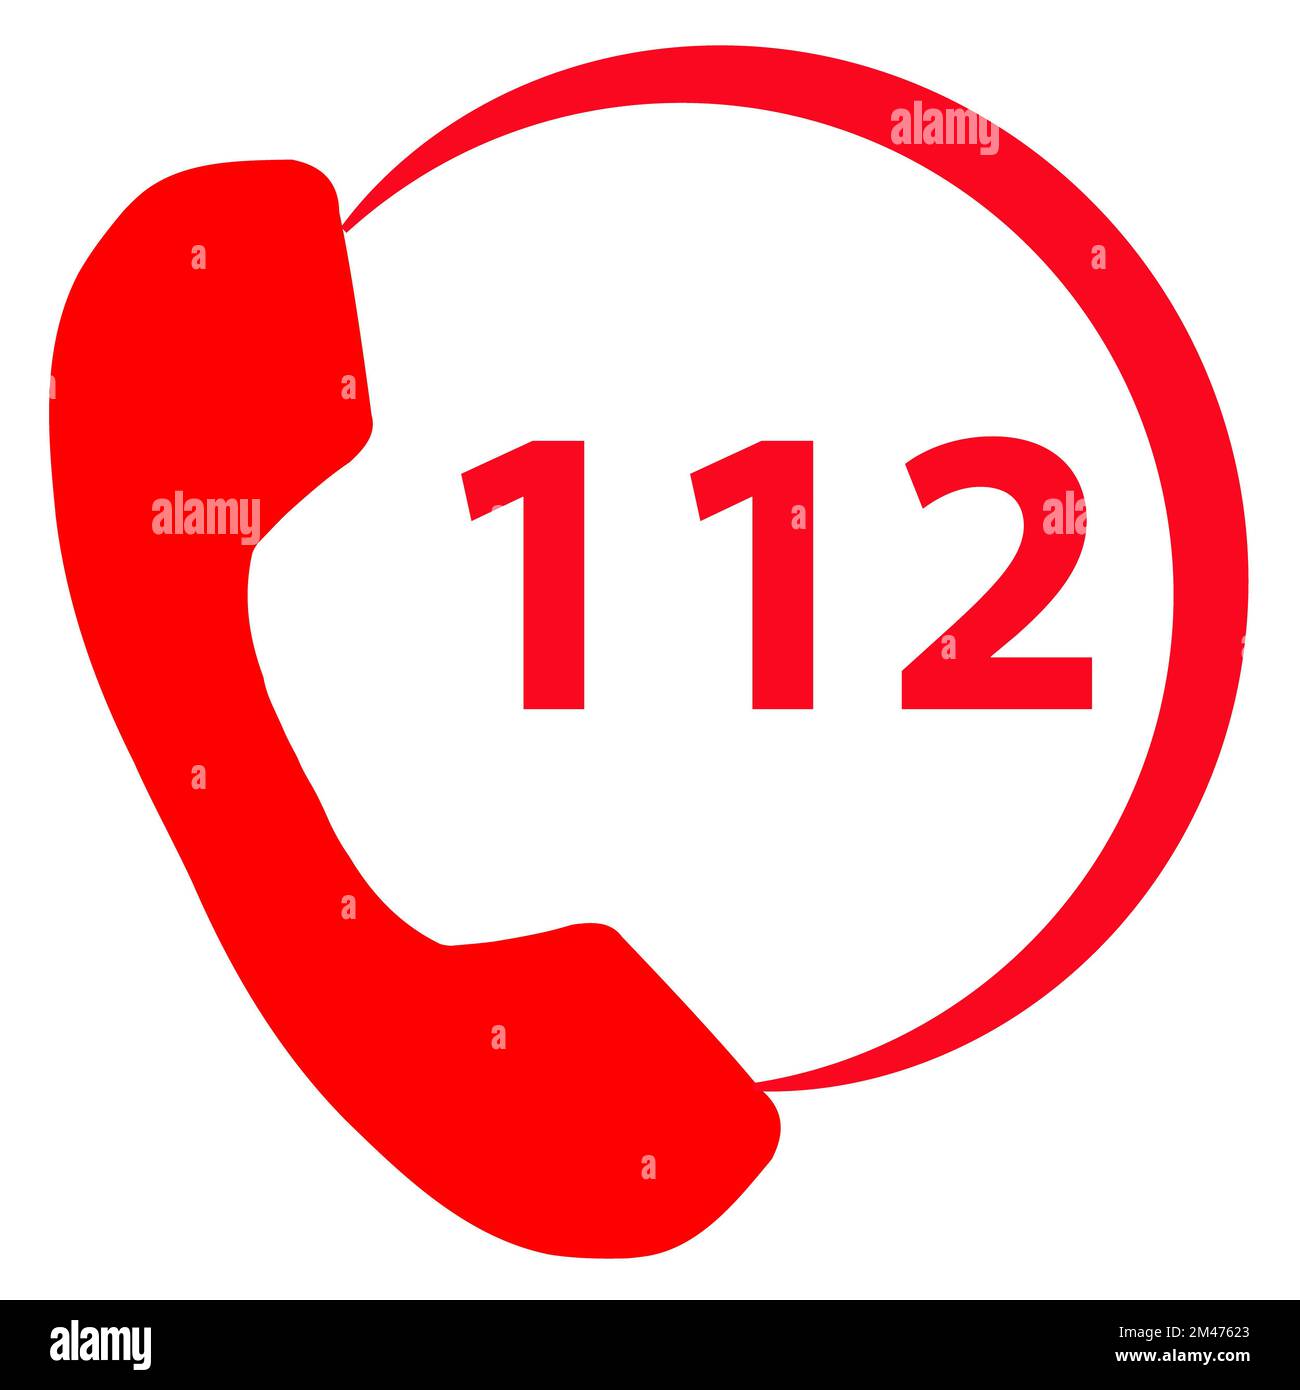 112 Emergency Call Number. Emergency call sign. flat style. Stock Photo